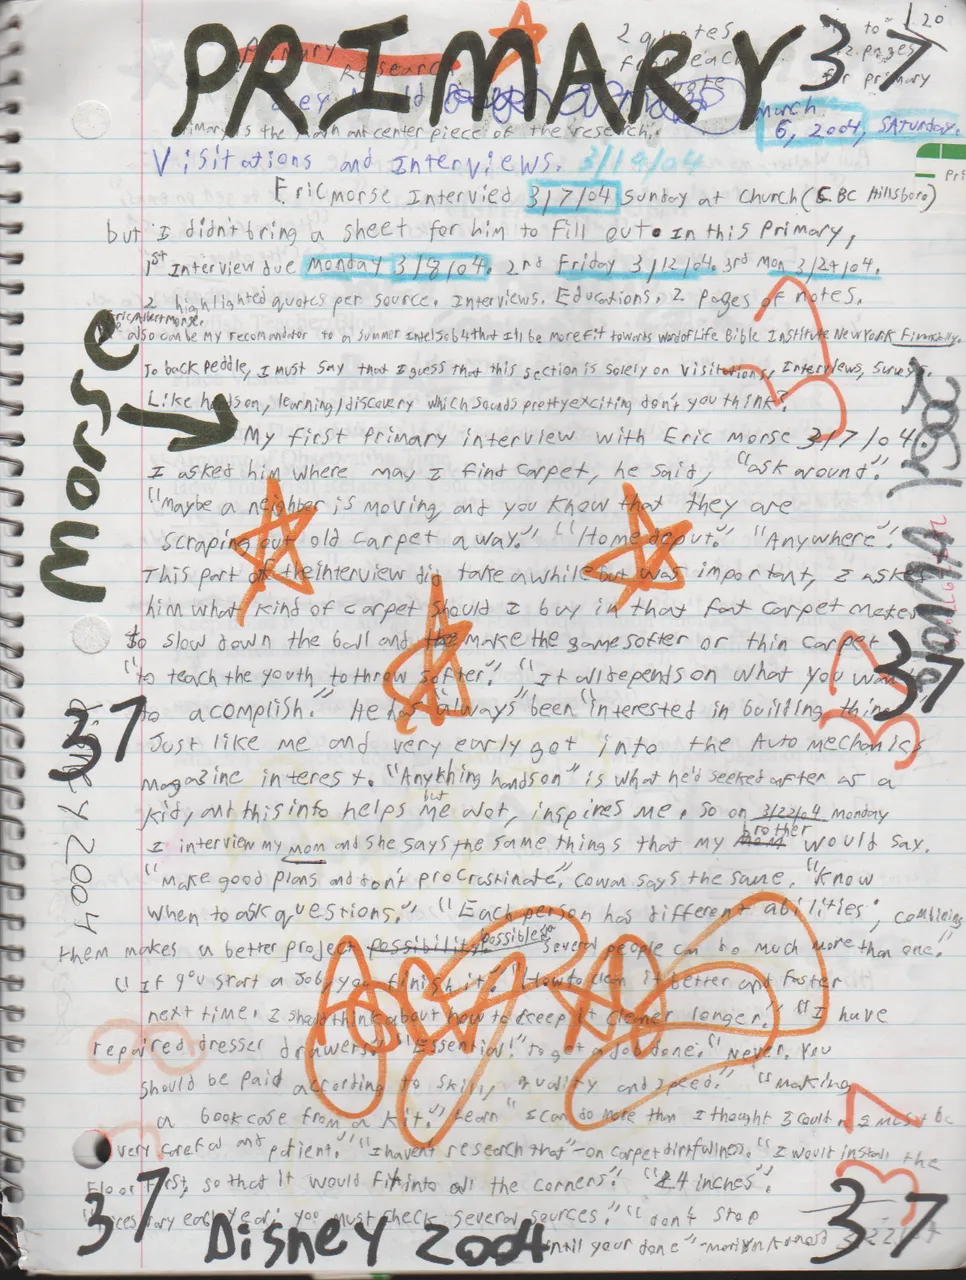 2004-01-29 - Thursday - Carpetball FGHS Senior Project Journal, Joey Arnold, Part 02, 96pages numbered, Notebook-32 ok ok.png